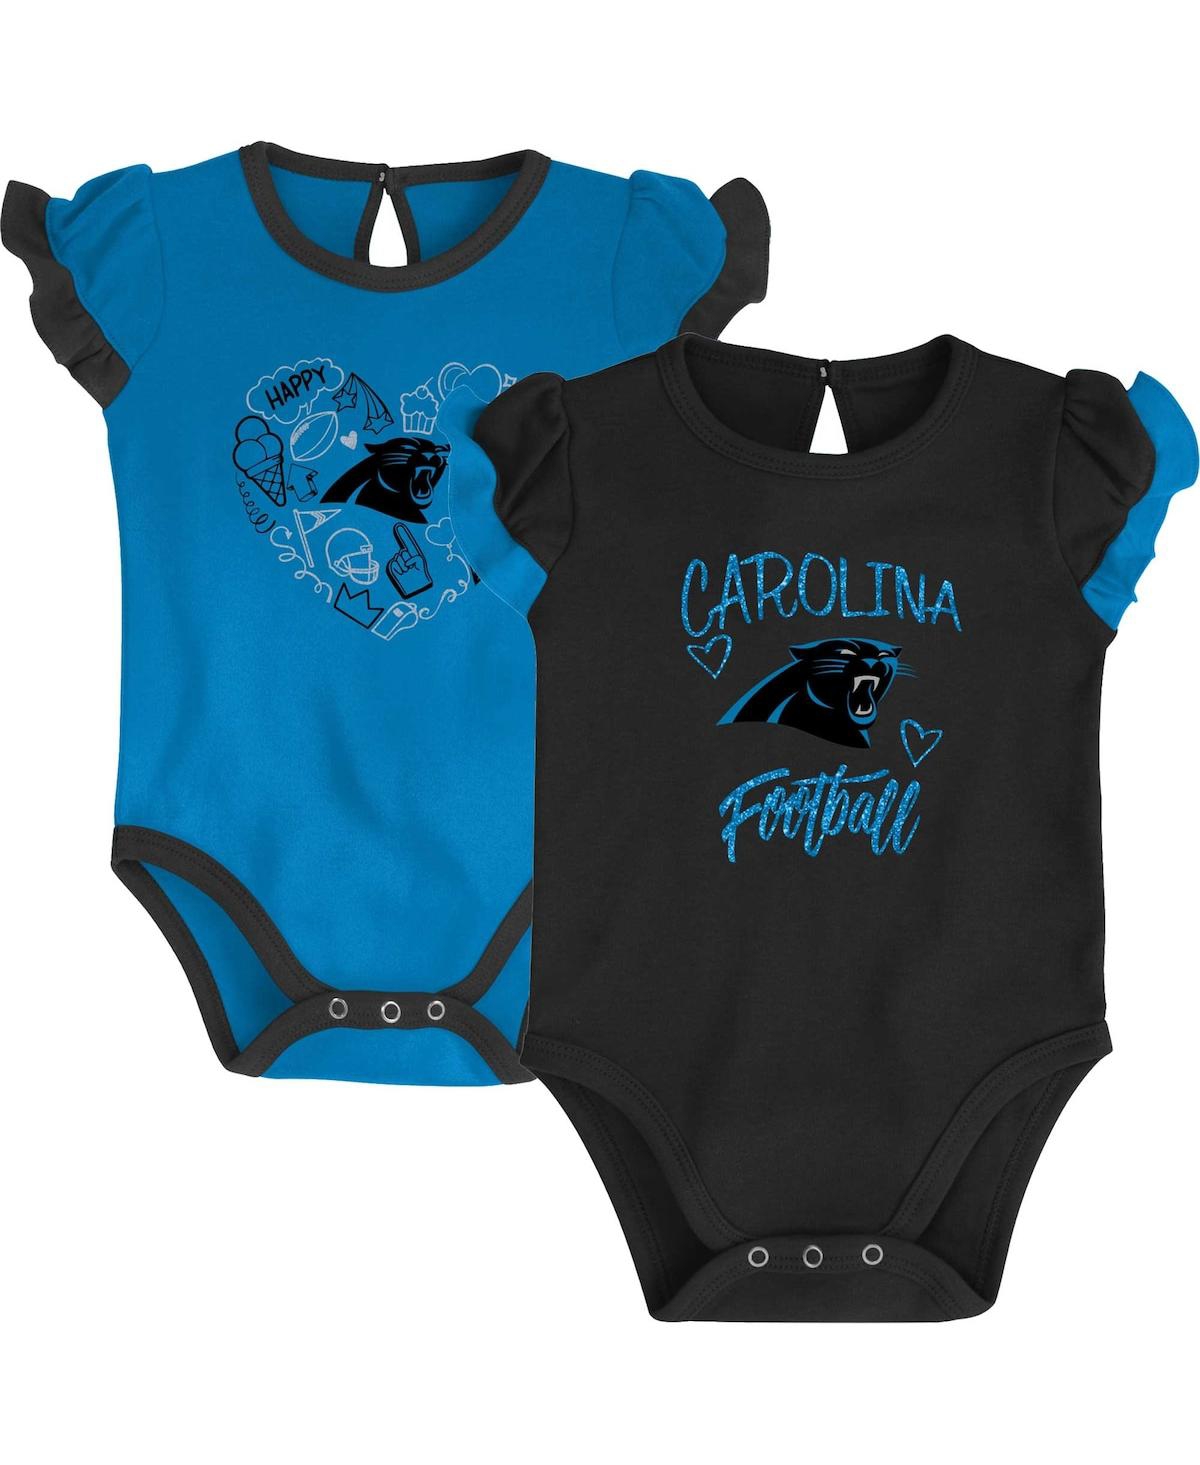 Outerstuff Babies' Newborn And Infant Boys And Girls Black, Blue Carolina Panthers Too Much Love Two-piece Bodysuit Set In Black,blue